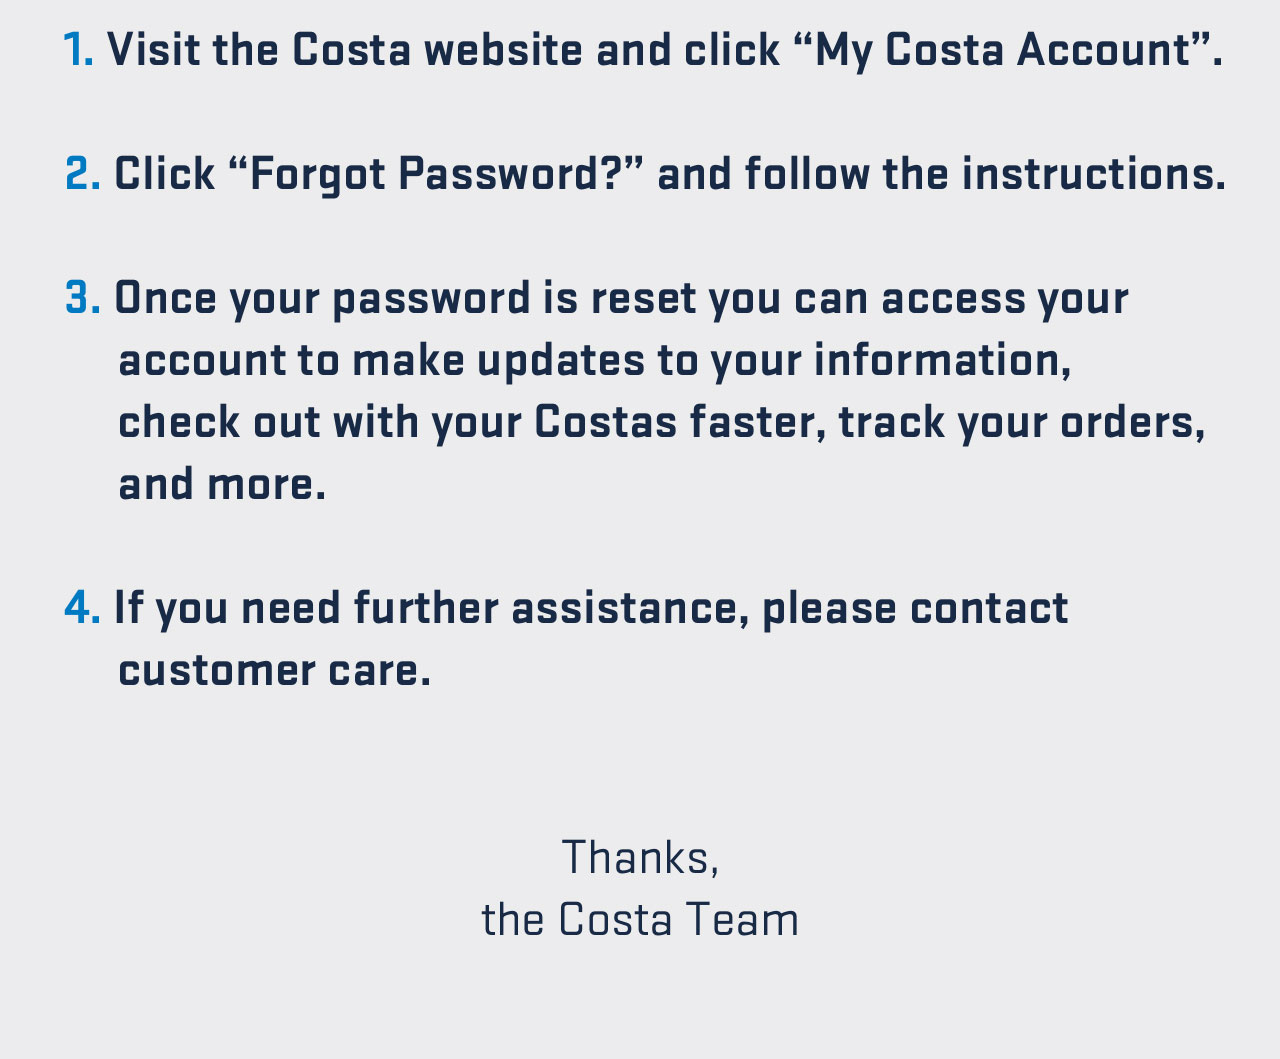 

1. Visit the Costa website and click -My Costa Account-.
2. Click -Forgot Password?- and follow the instructions.
3. Once your password is reset you can access your account to make updates to your information, check out with your Costas faster, track your orders, and more.
4. If you need further assistance, please contact customer care.

Thanks,
the Costa Team


									